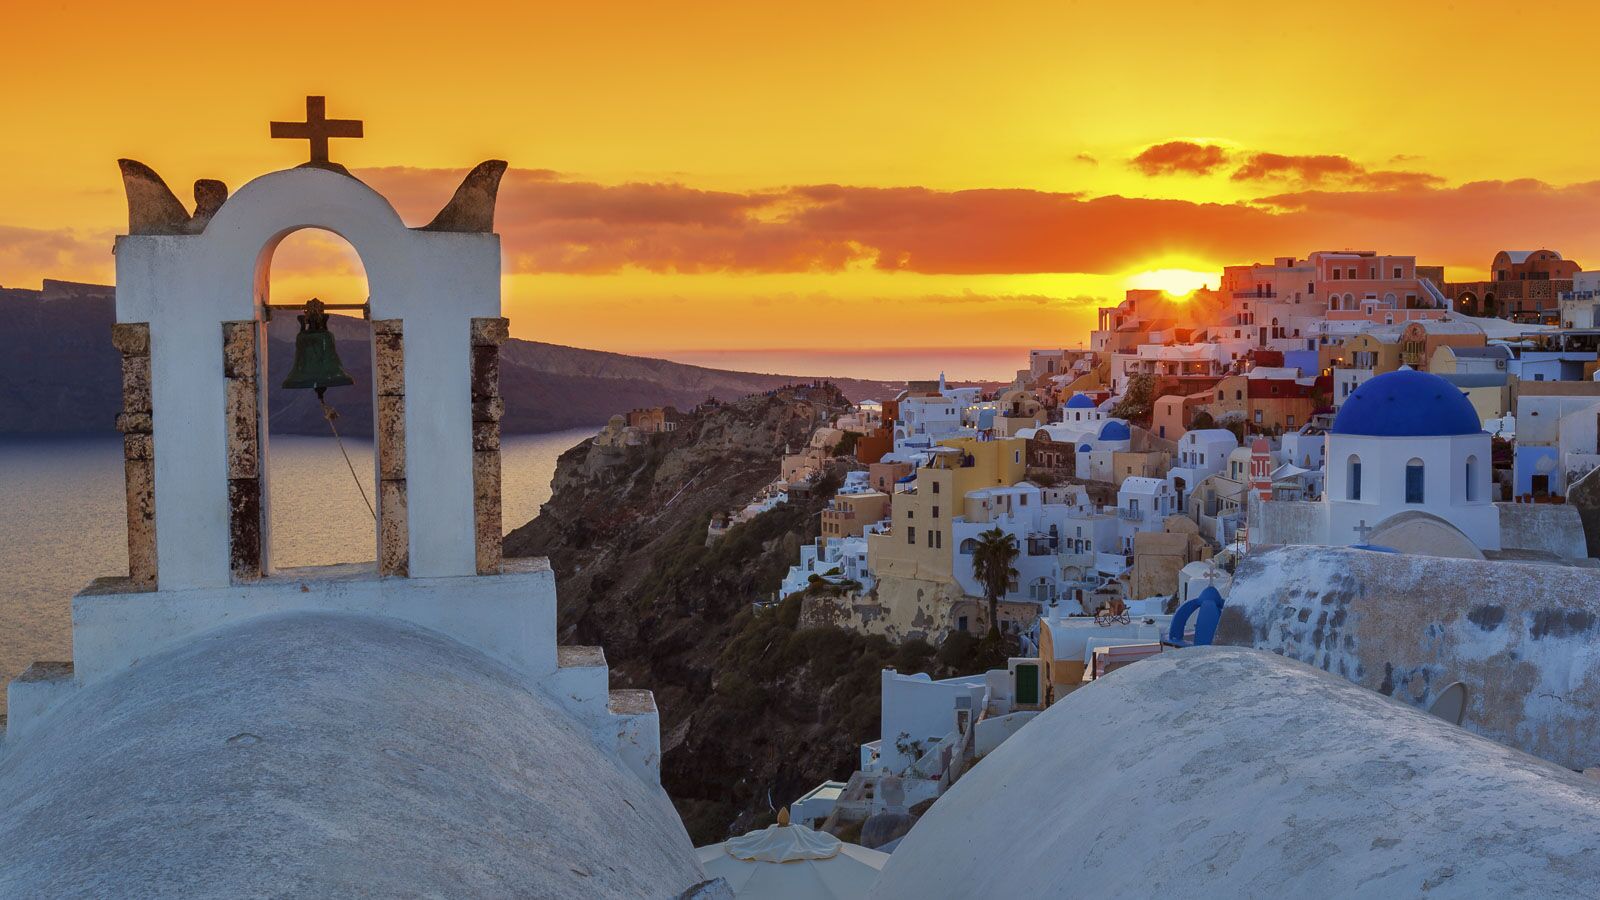 santorini blue domes and bells at sunset